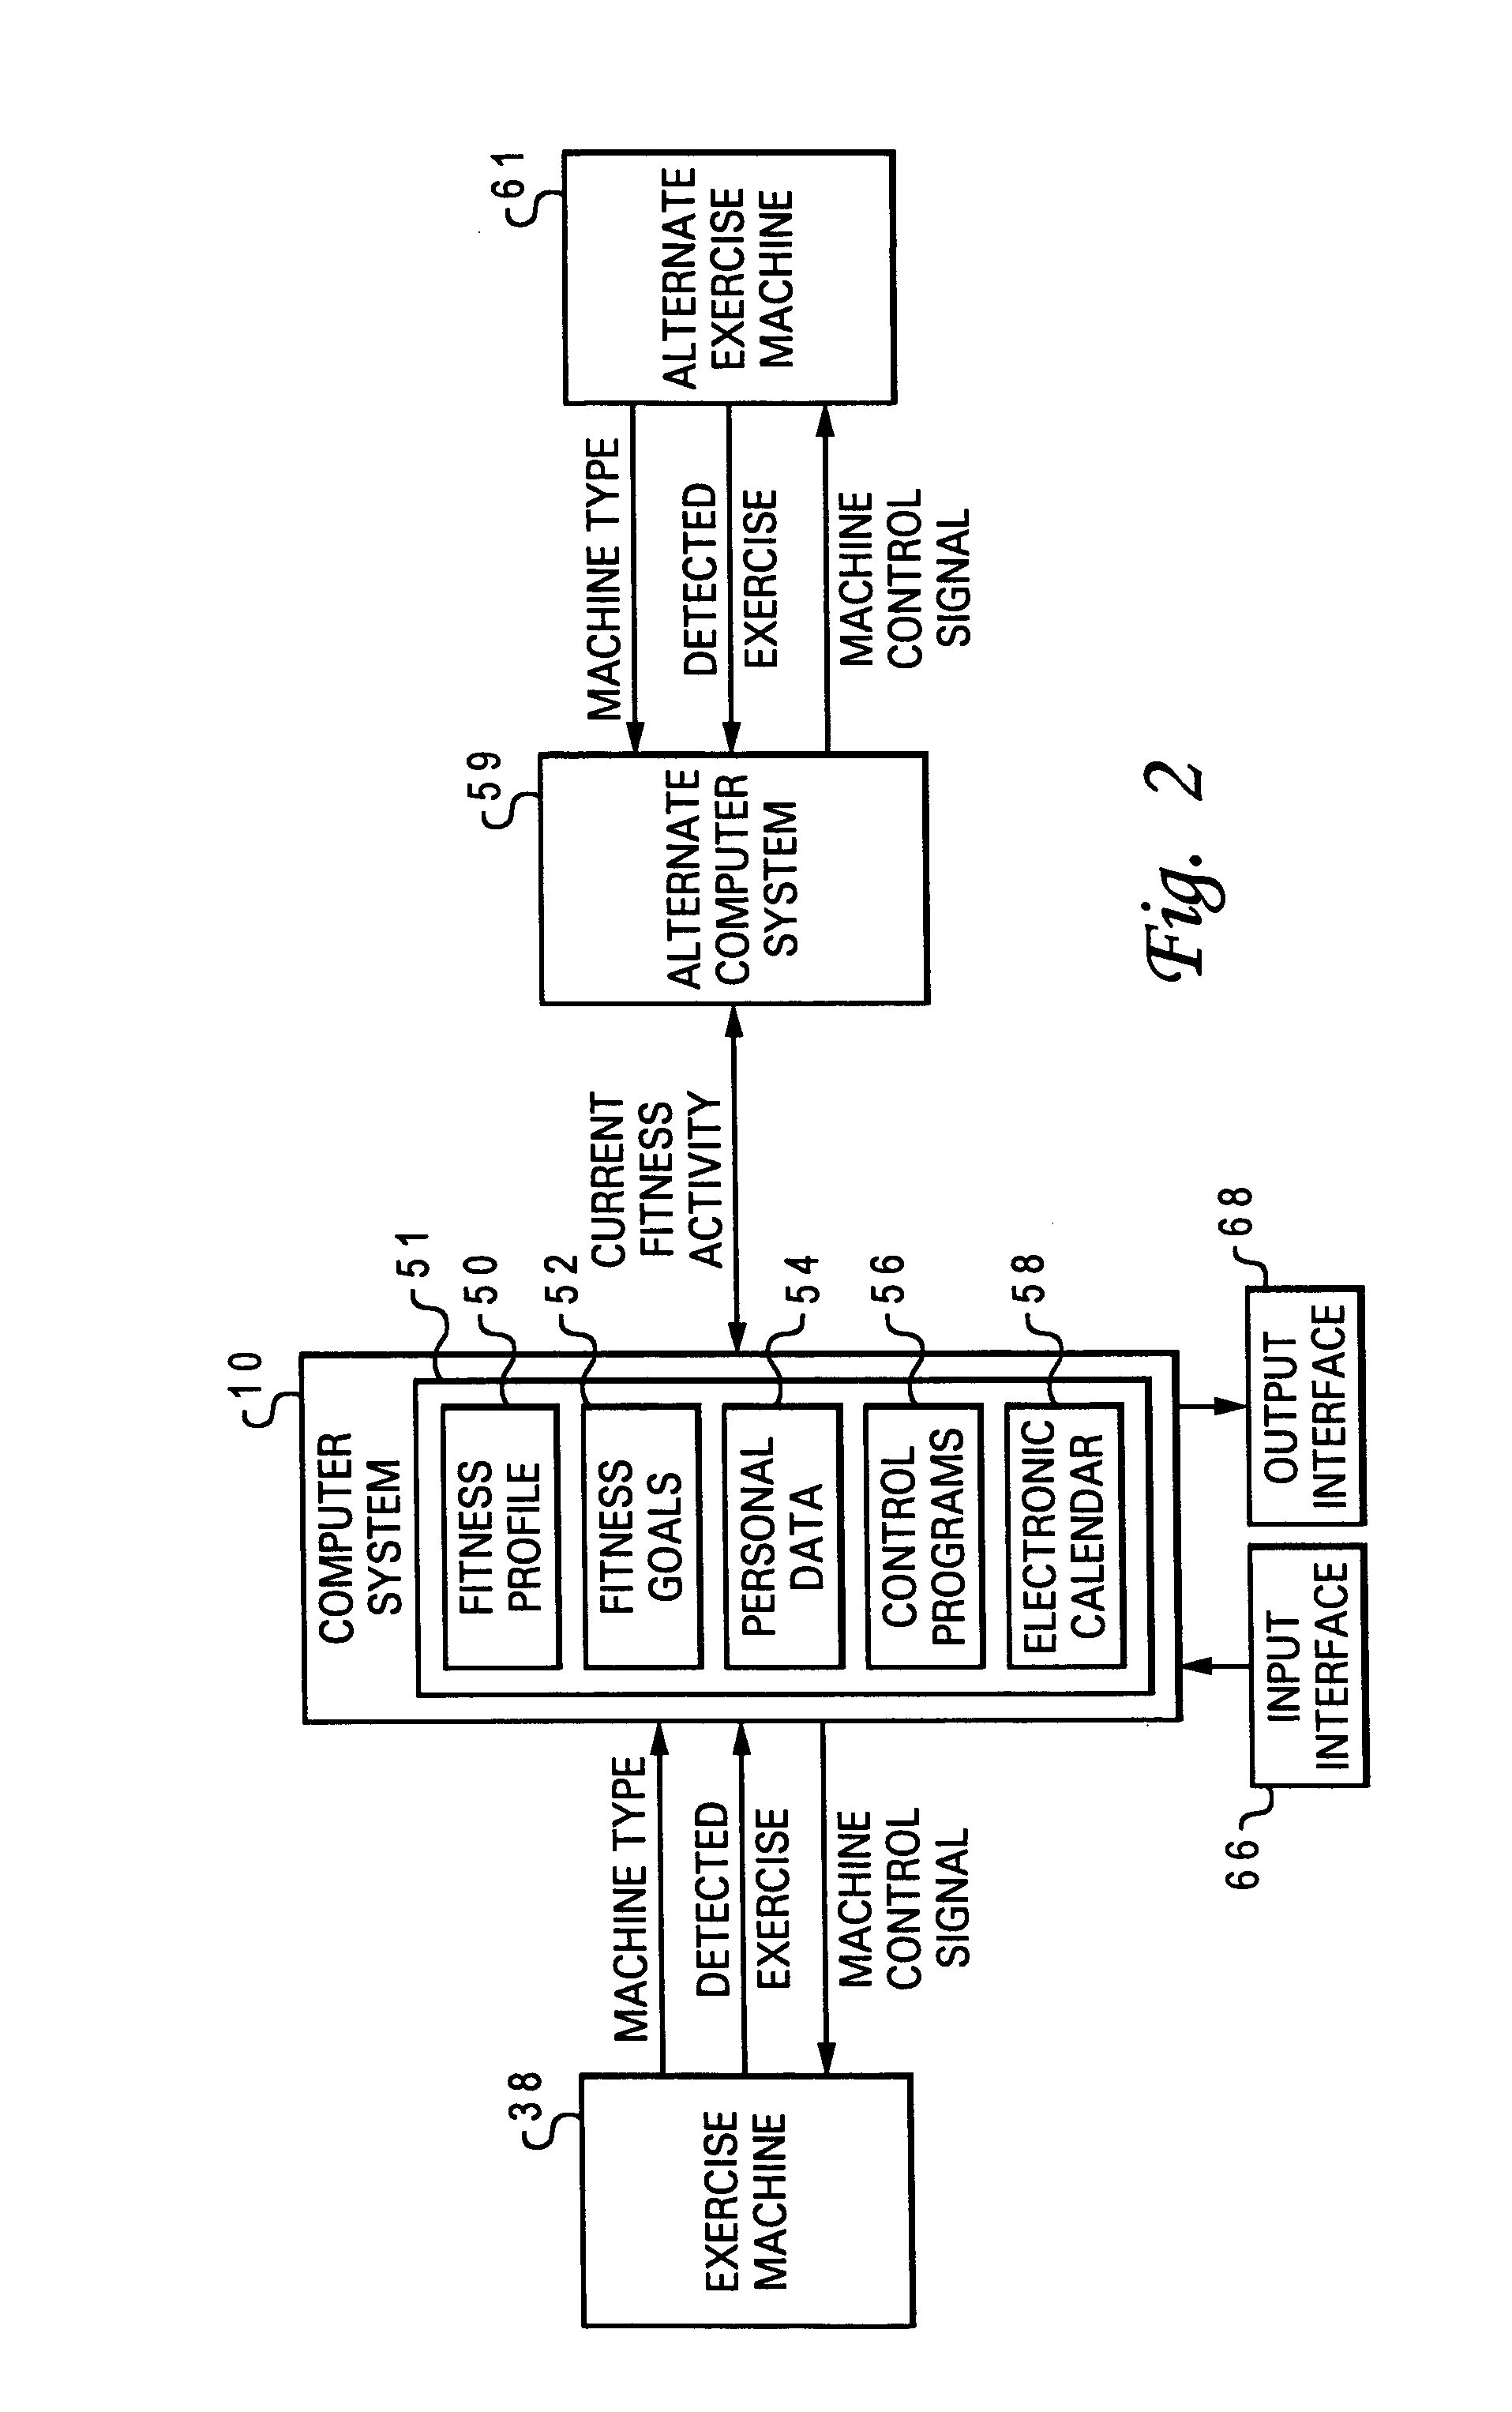 Method for monitoring cumulative fitness activity